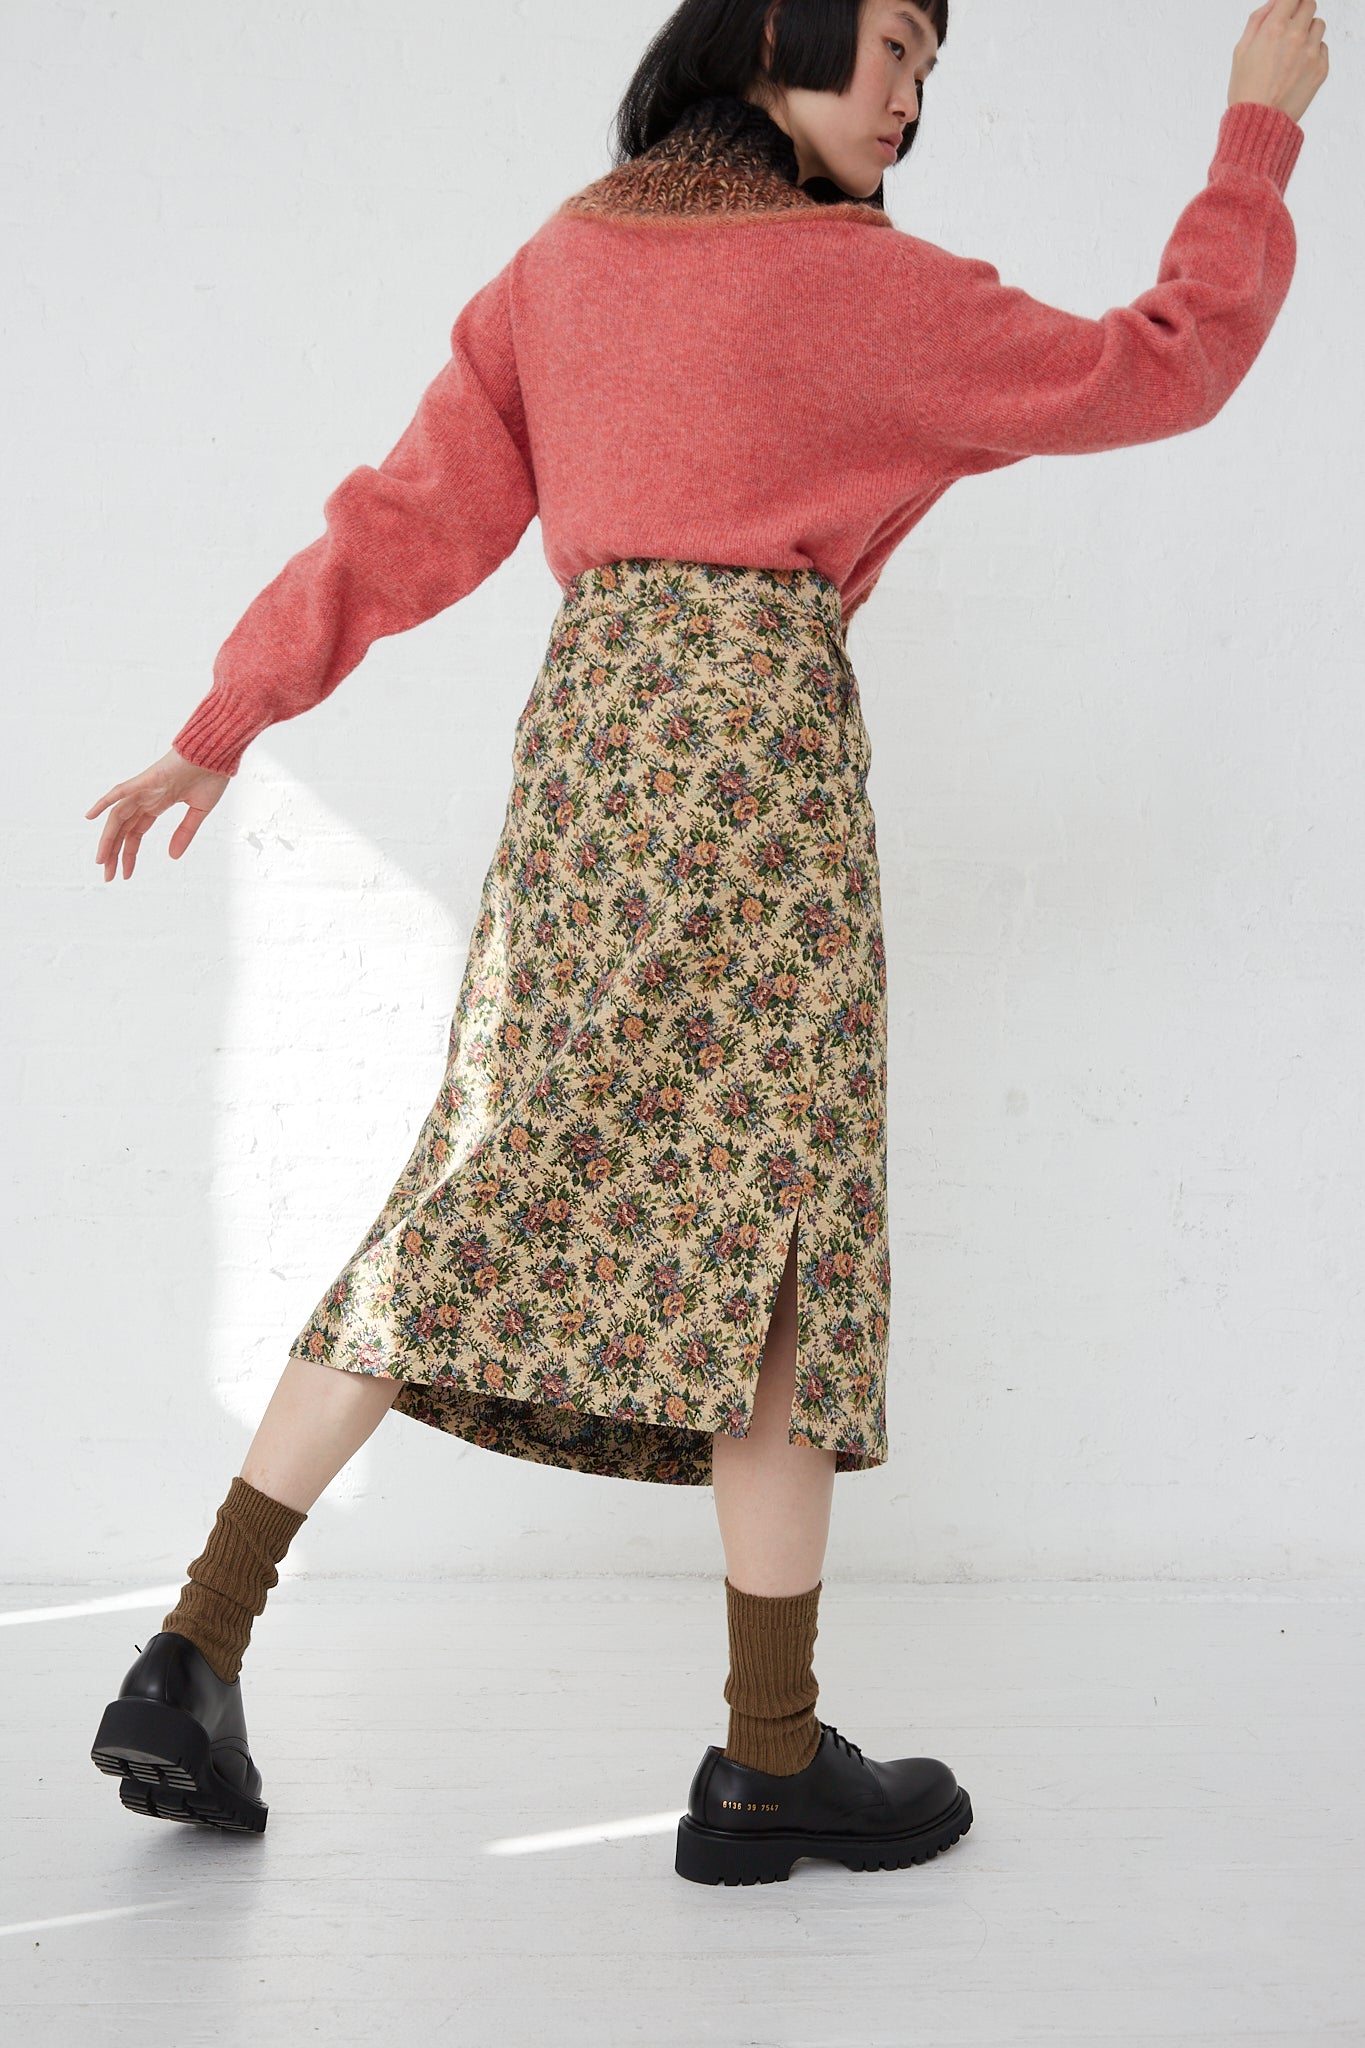 A woman in Bless's SMLXL Skirt No. 75 in Flower and a luxury lifestyle brand's pink sweater.